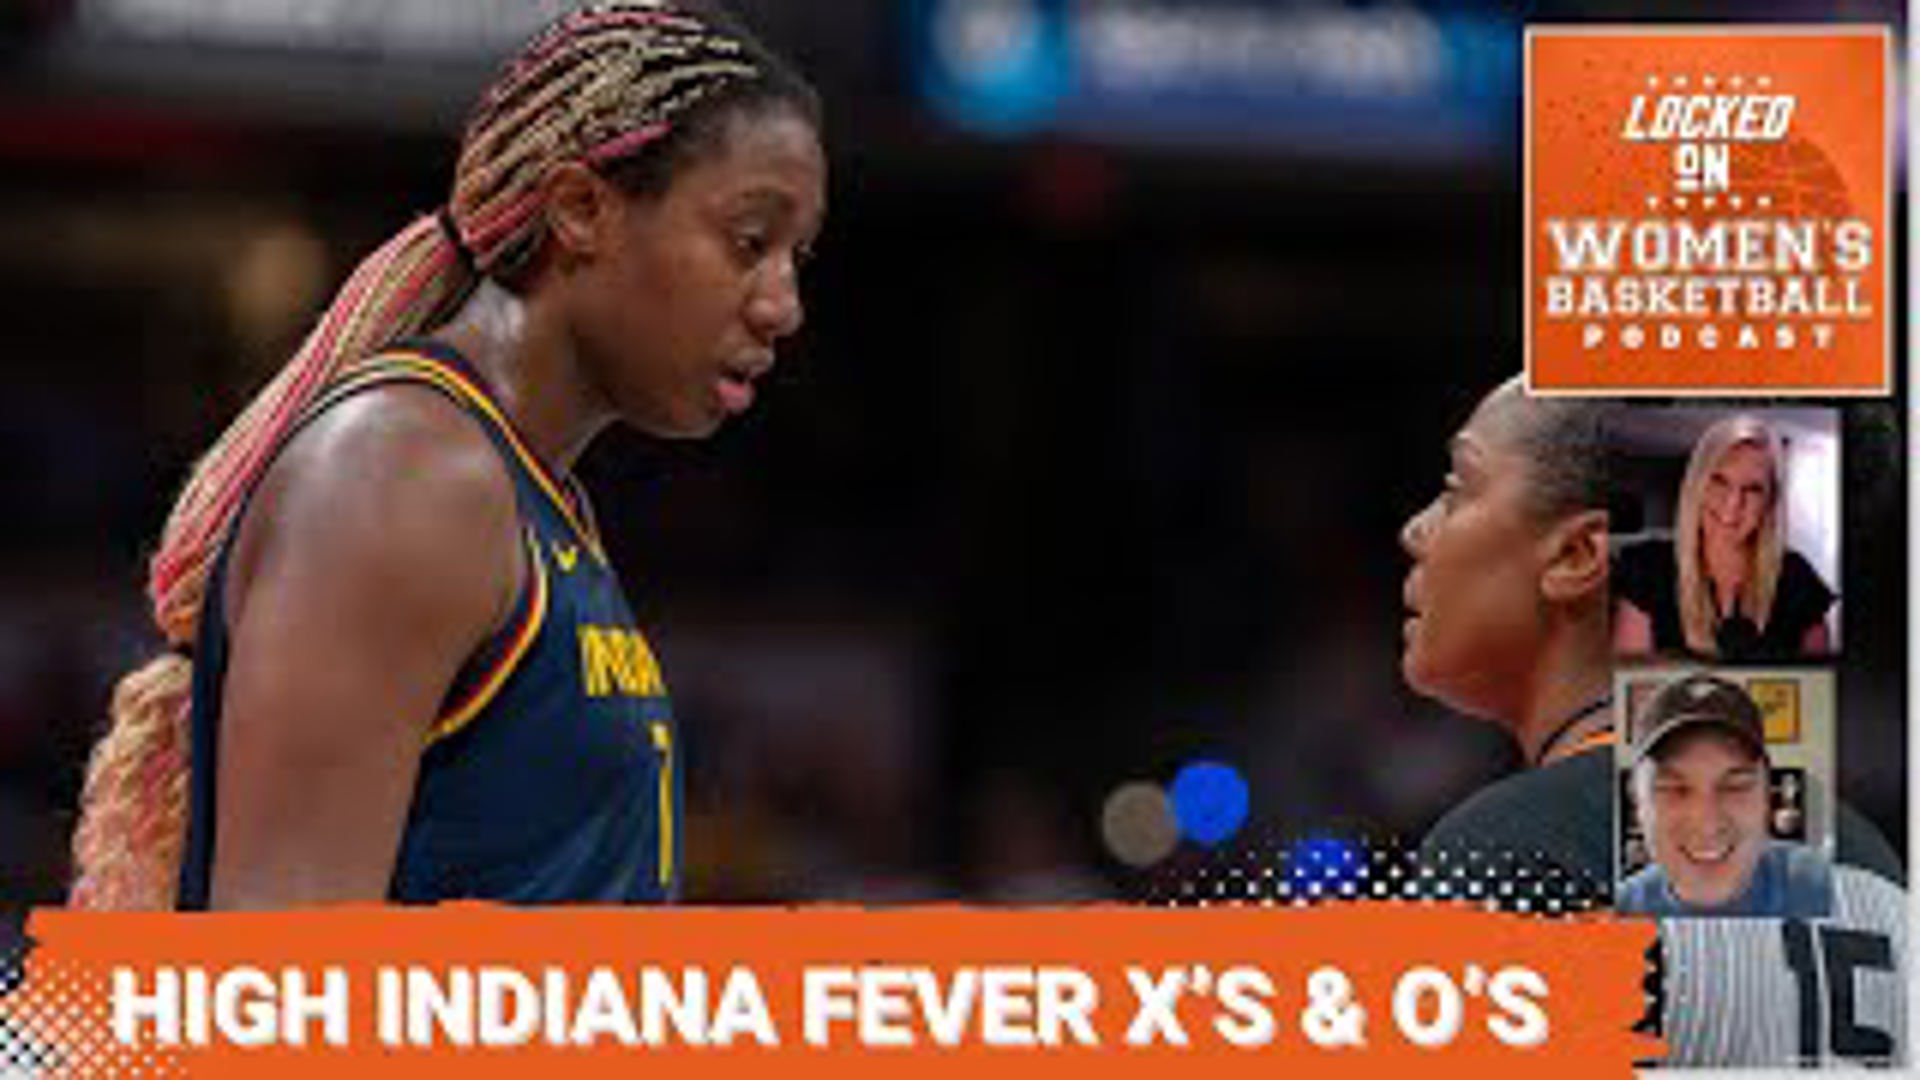 With the WNBA season in high gear, we are turning a lot of eyeballs and fans to the women's game. Just as people poke holes and analyze NBA offenses and defenses.